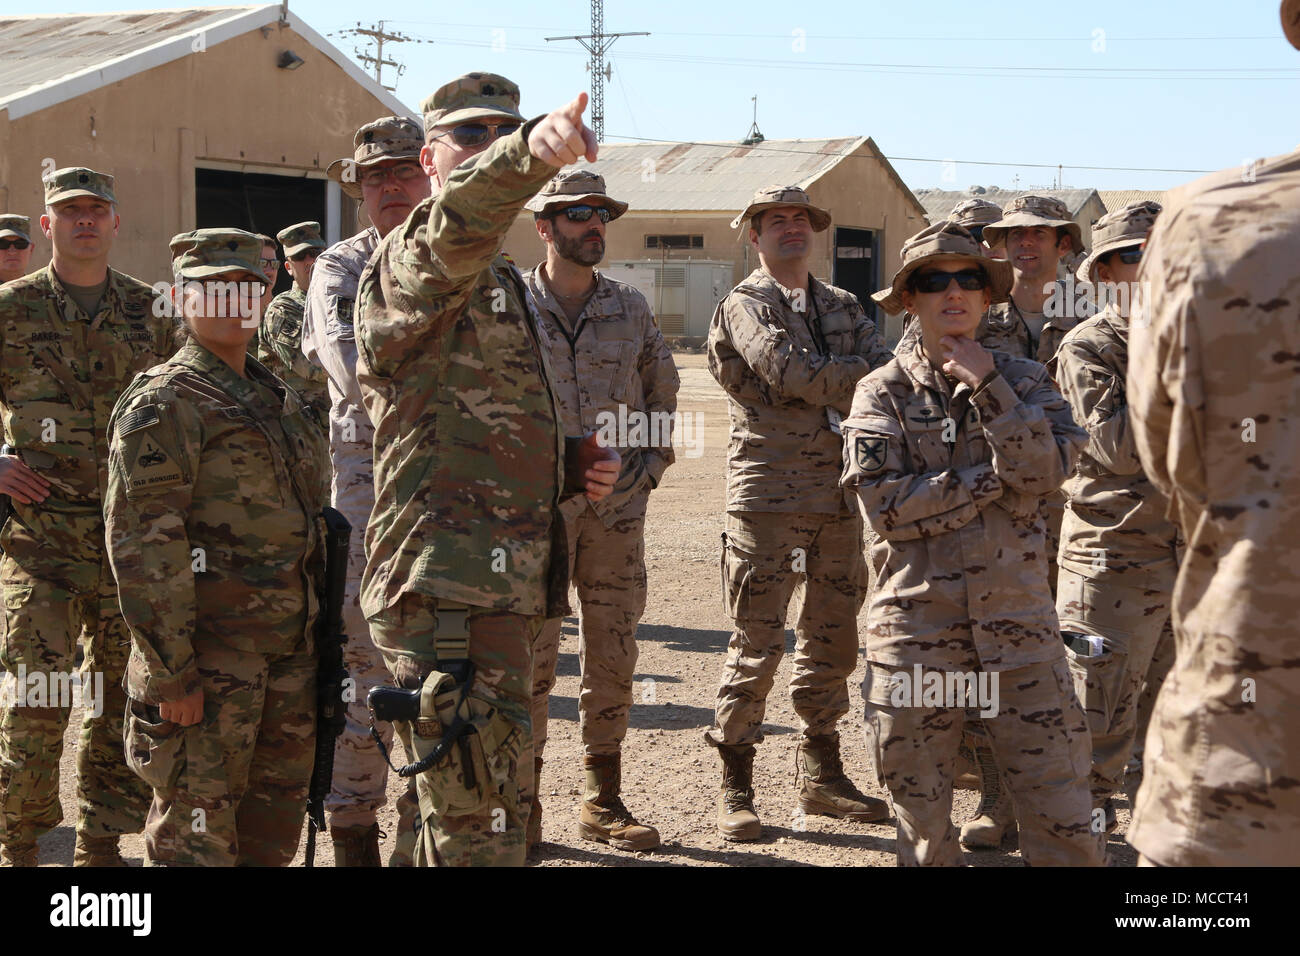 TAJI MILITARY COMPLEX, Iraq - U.S. Army Base Operations Support-Integrator  Commander Lt. Col Mark Turner, orients soldiers assigned to the Spanish army  to their potential aviation operations area during their inaugural  reconnaissance